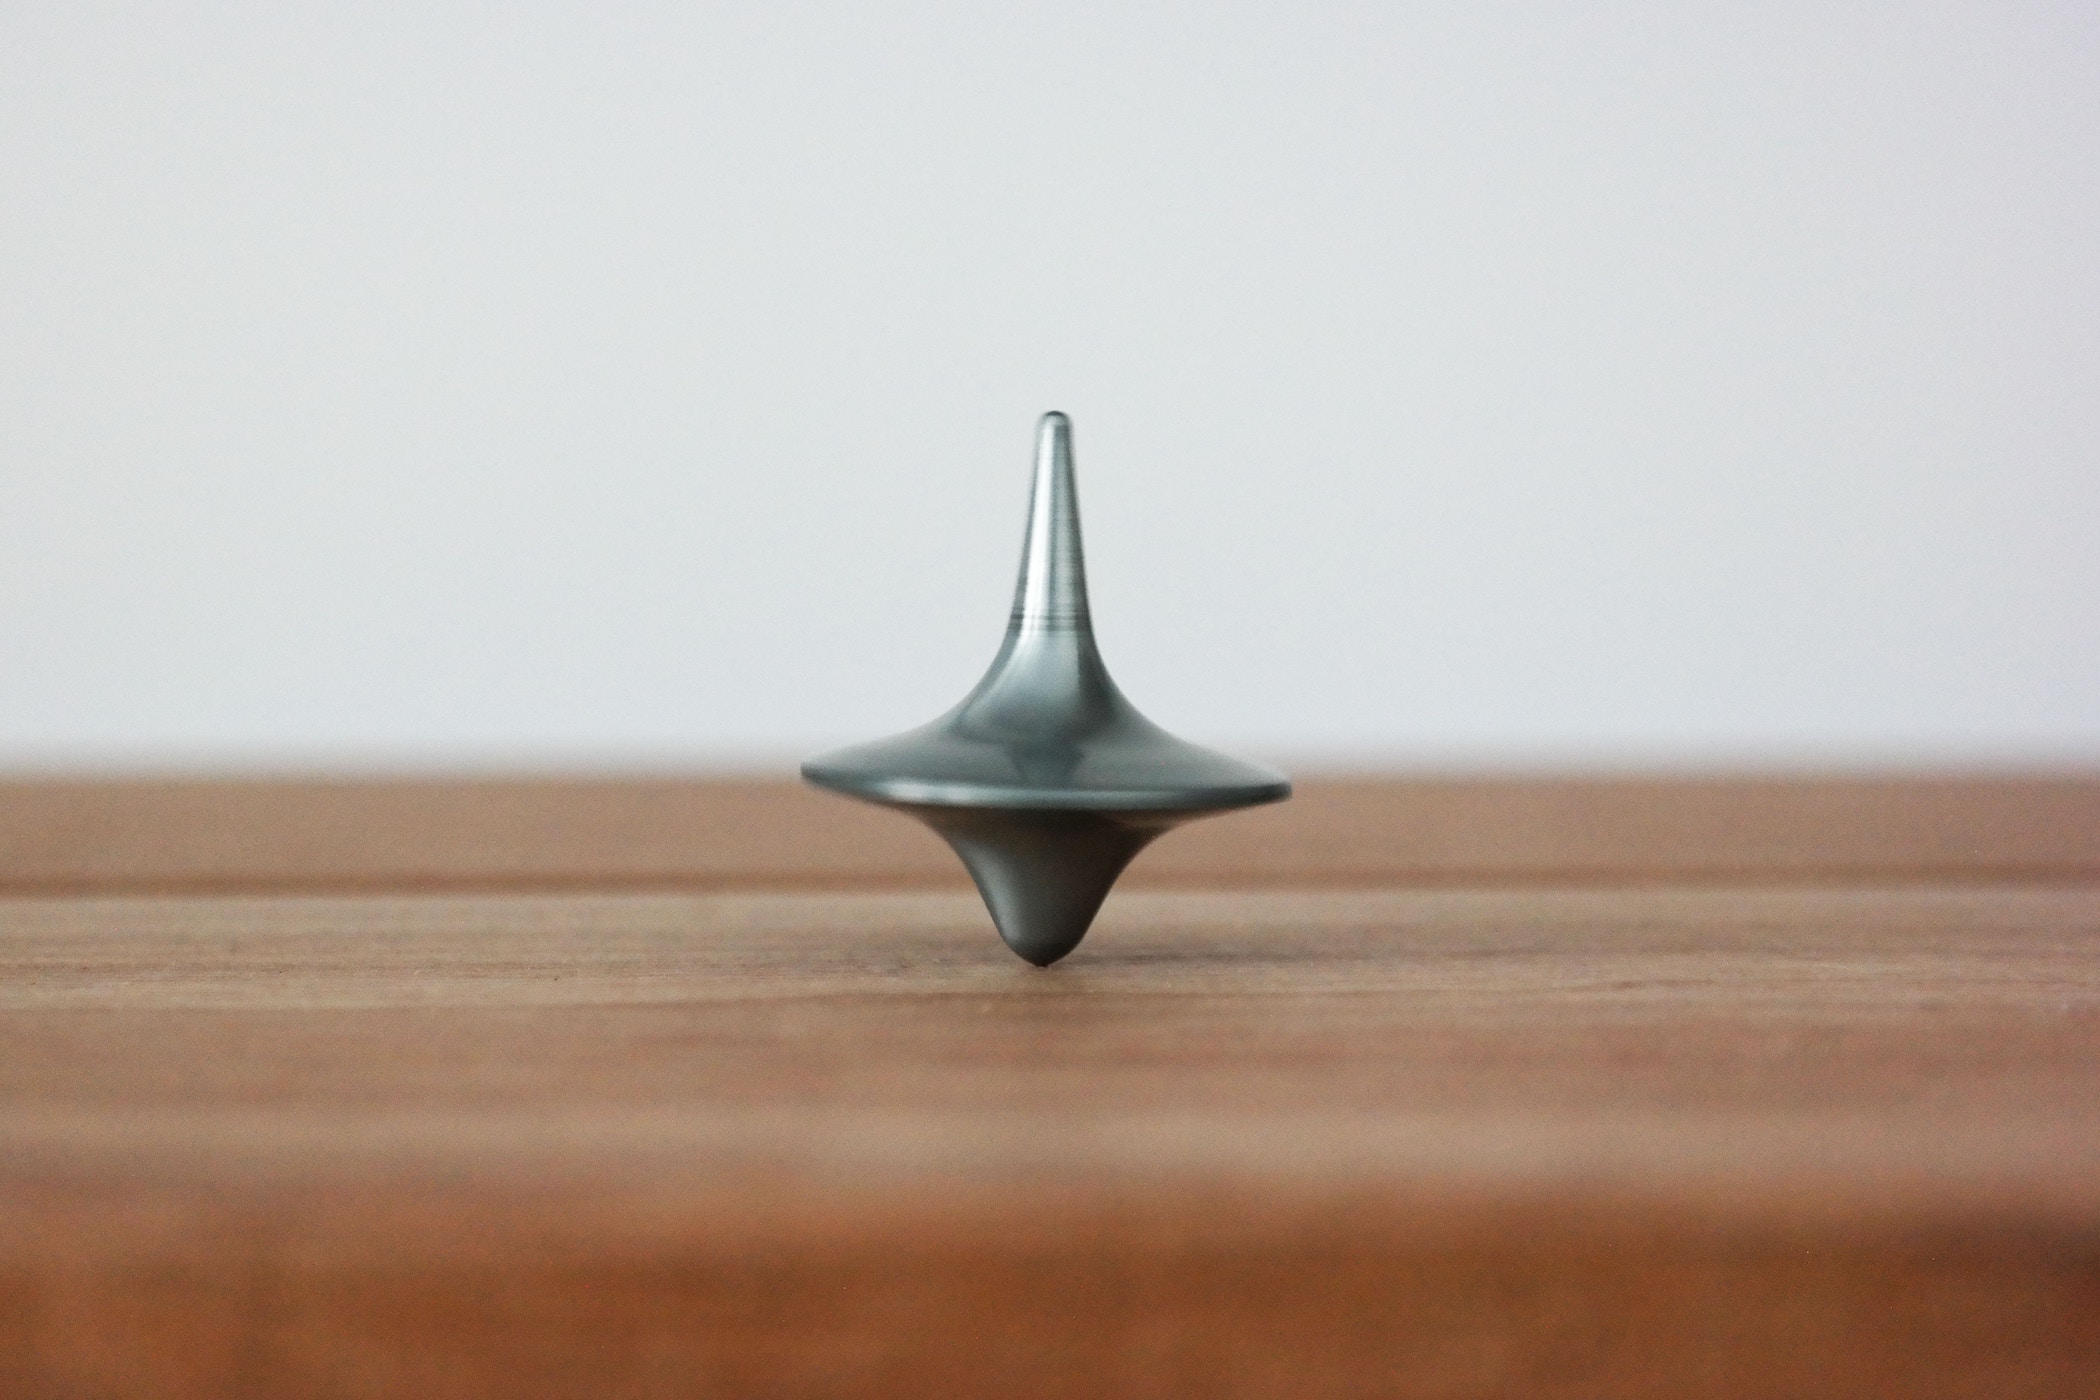 A spinning top